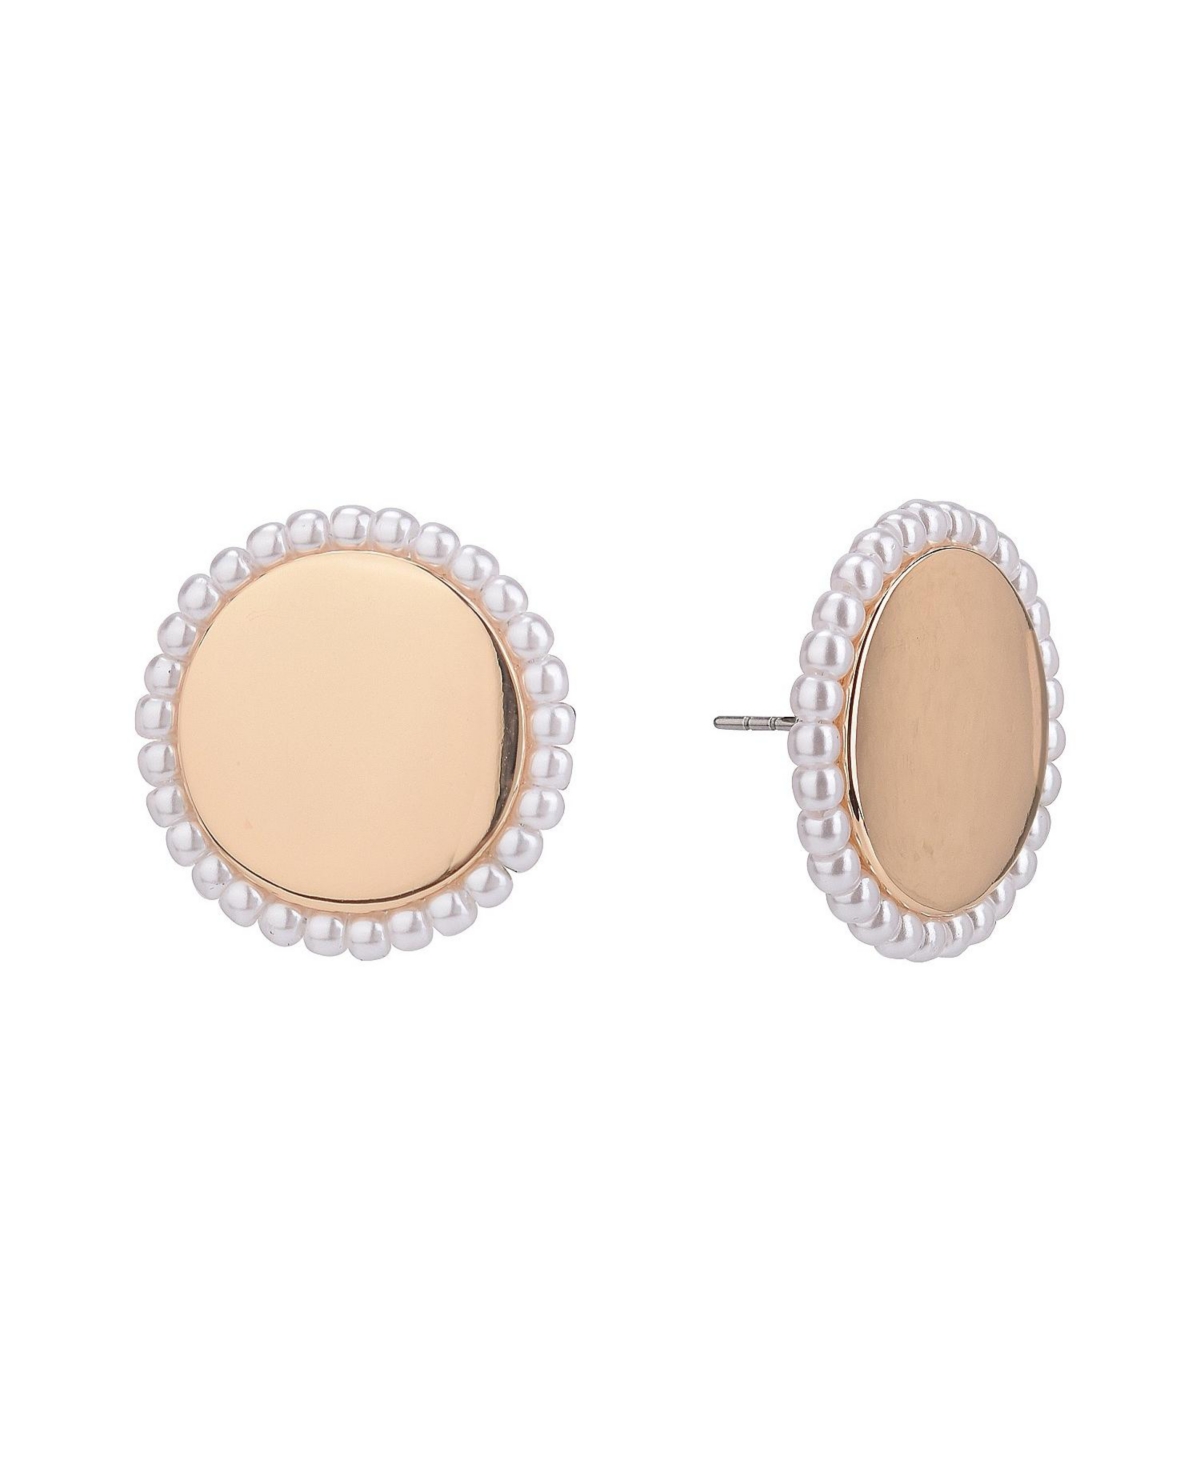 Round Button Earrings with Pearl Accents - Gold